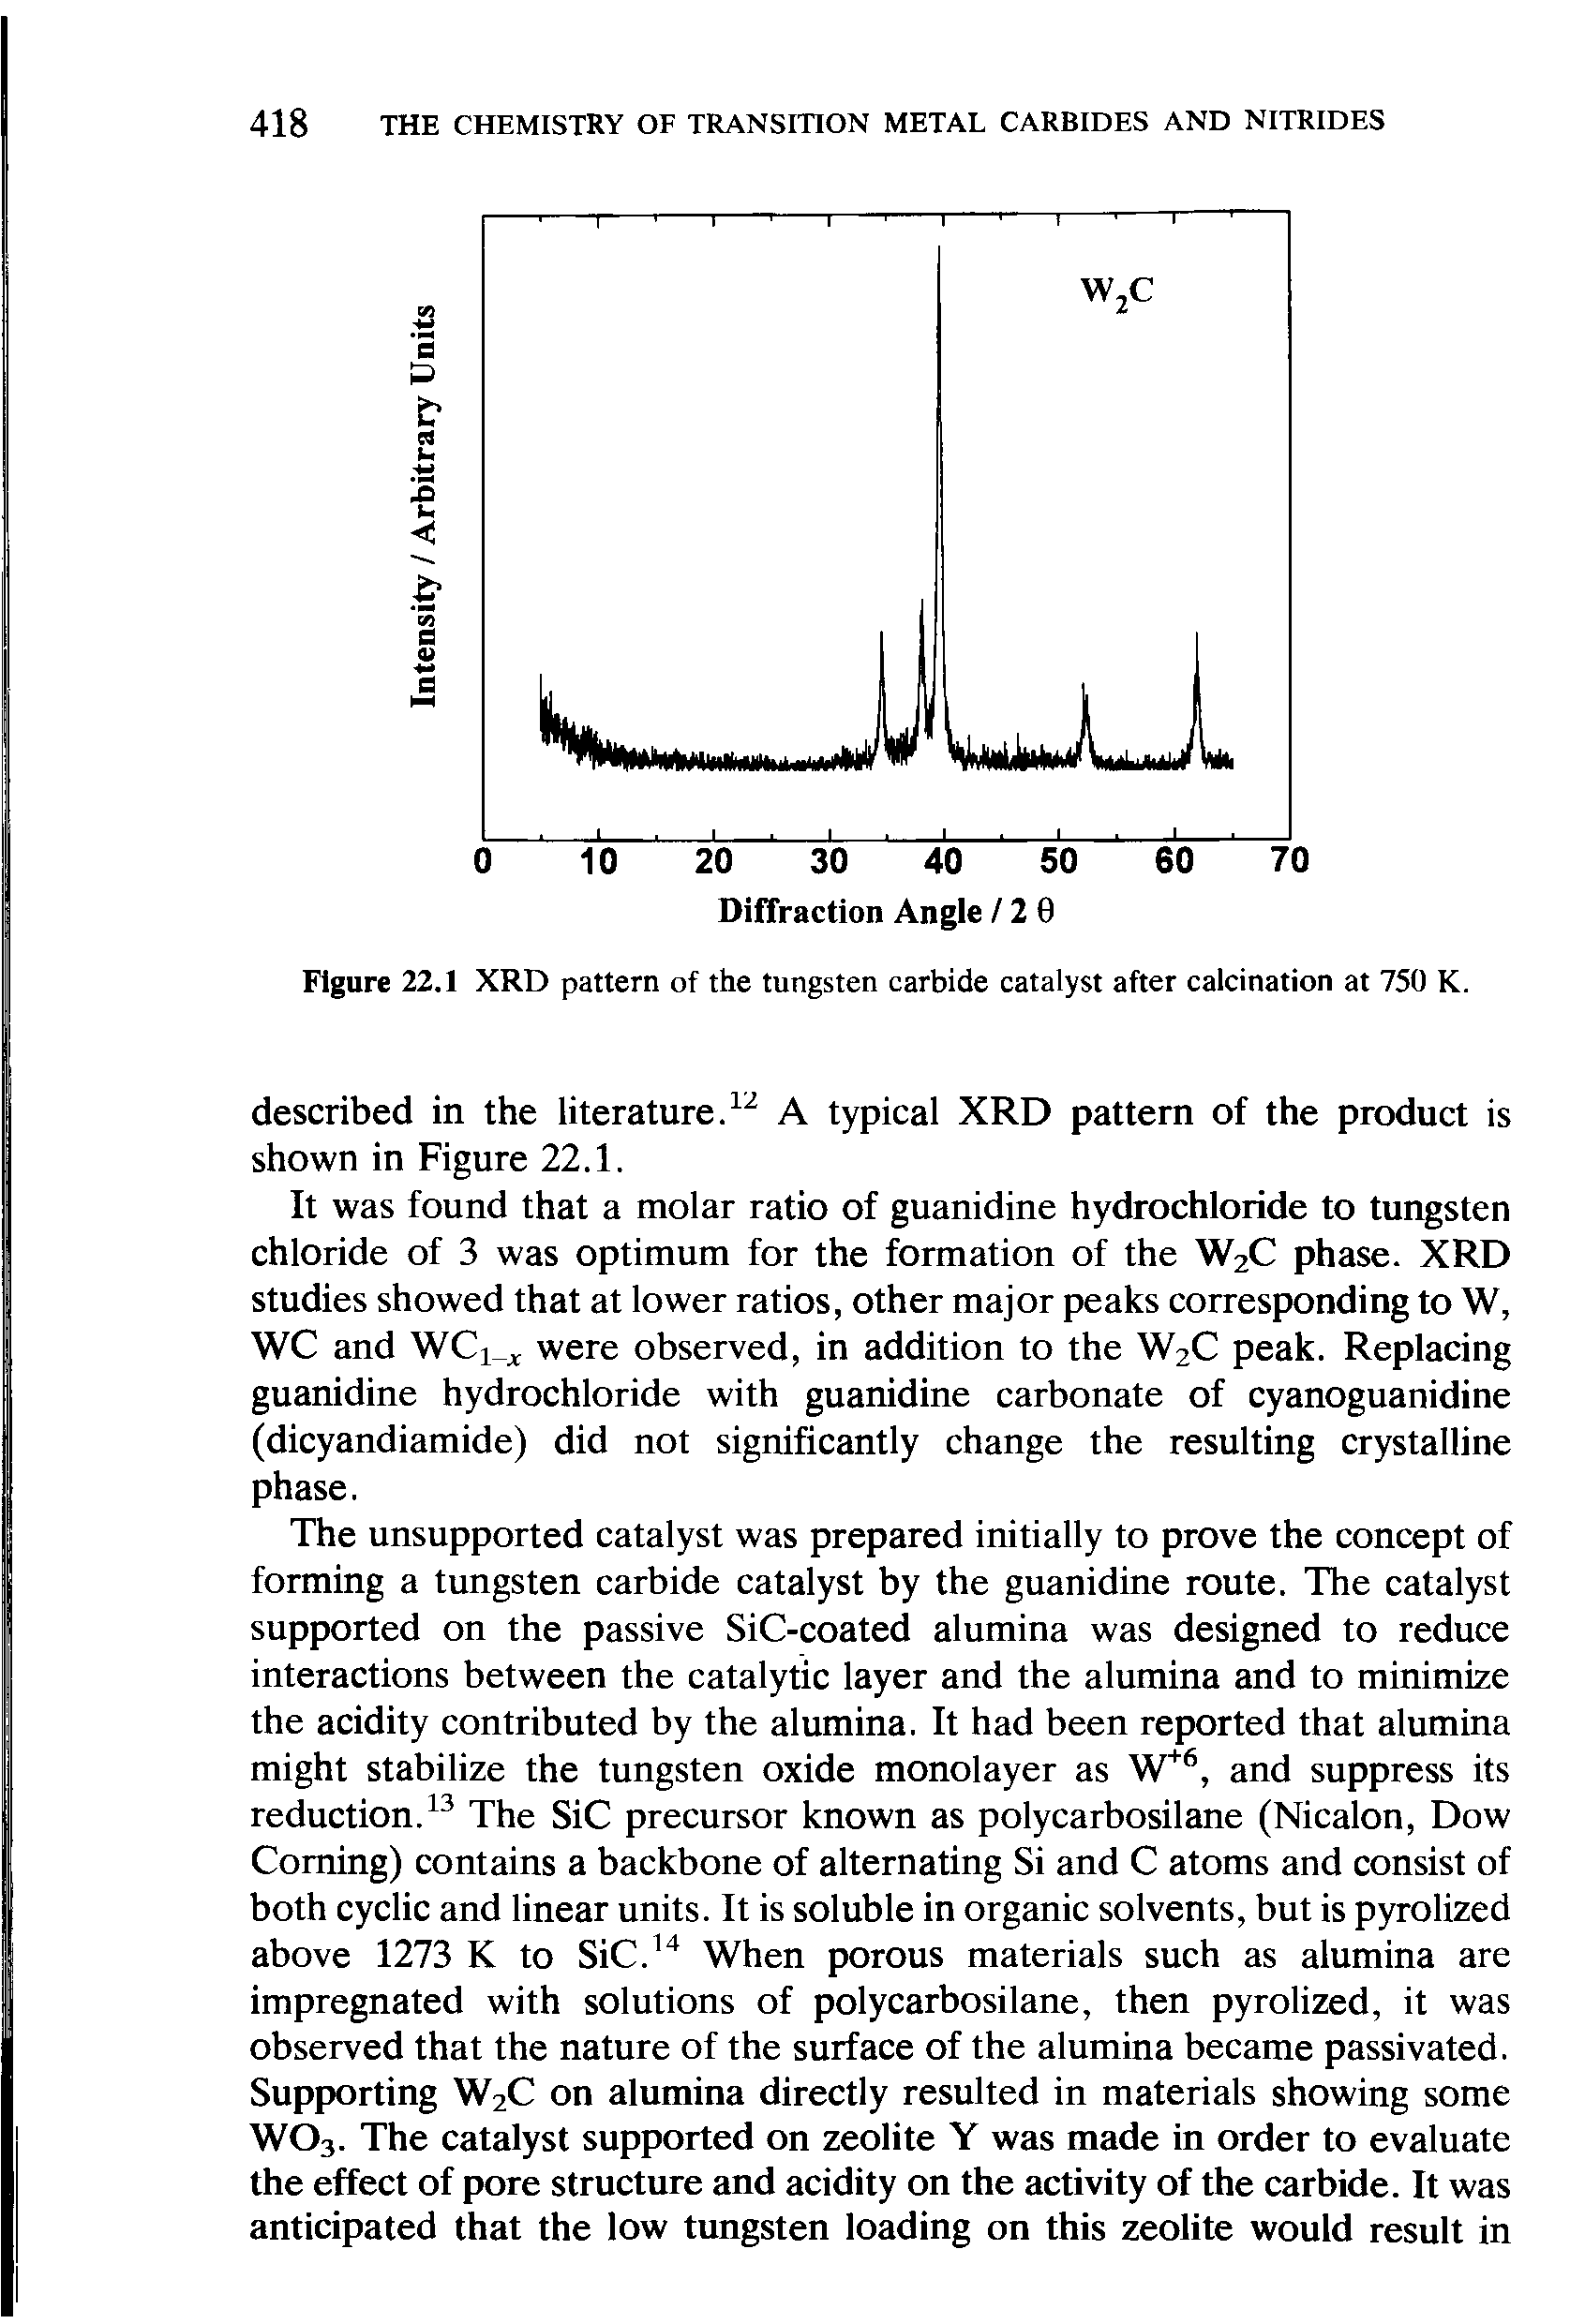 Figure 22.1 XRD pattern of the tungsten carbide catalyst after calcination at 750 K.